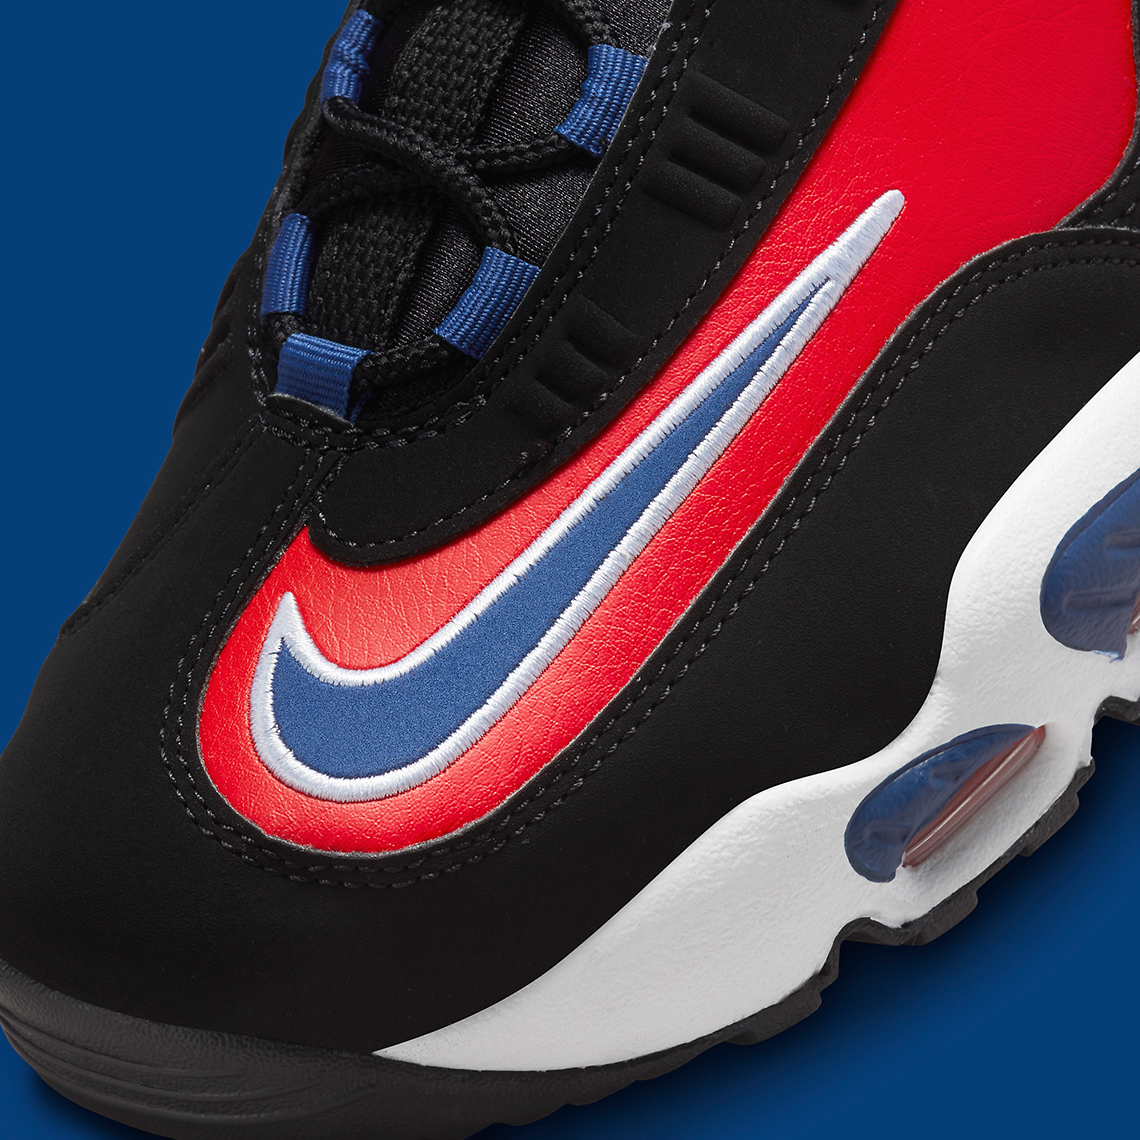 Nike Air Griffey Max 1 Navy Red Release Date 9